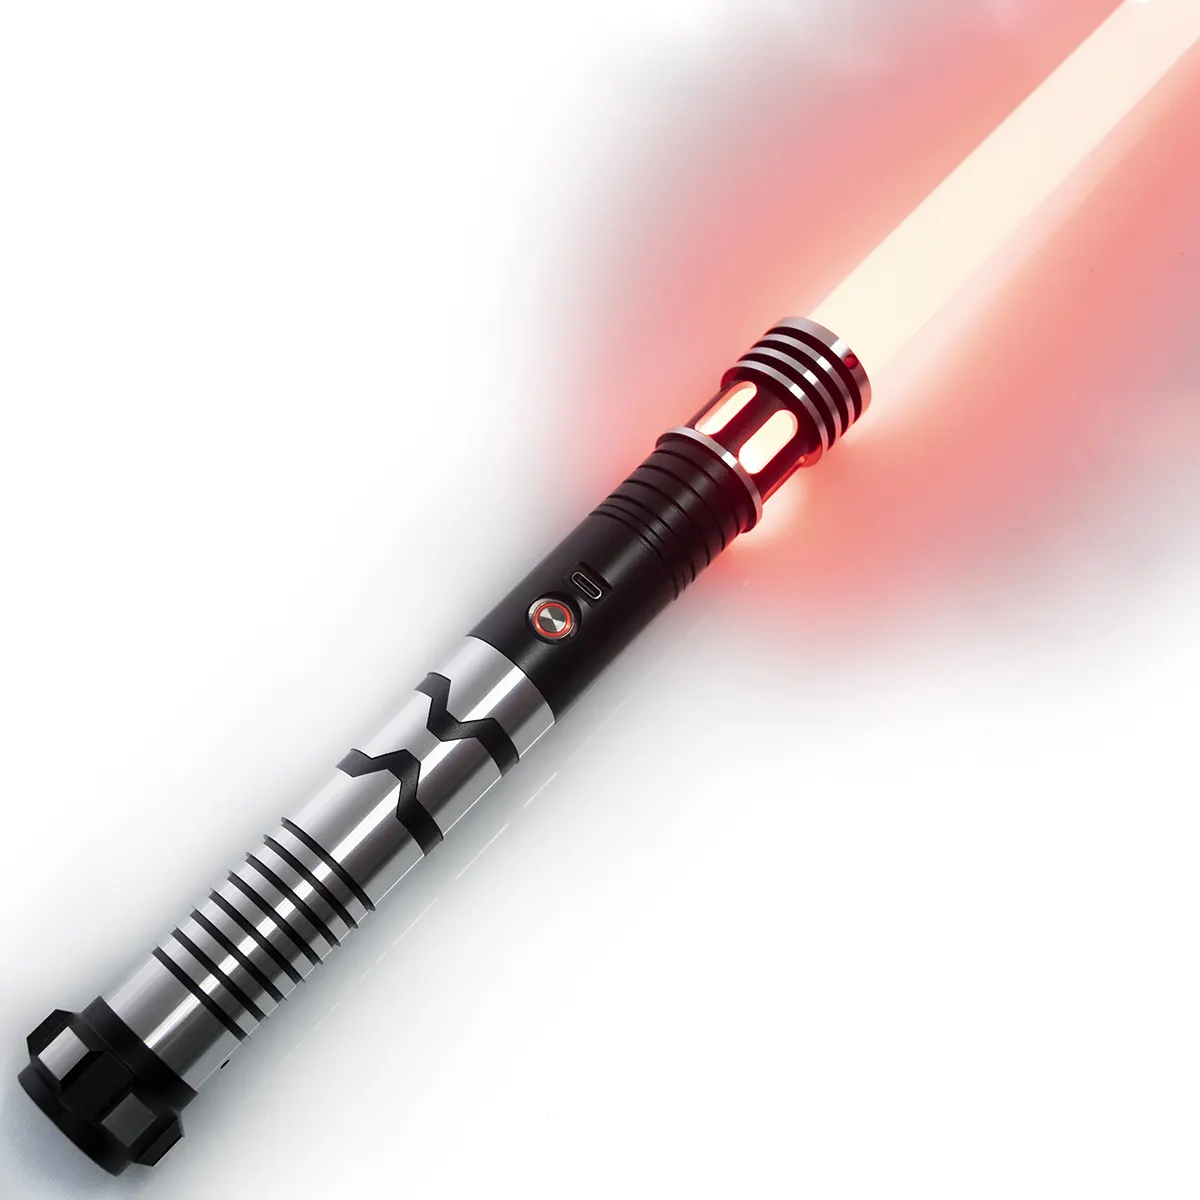 LGT SABERSTUDIO flash on clash Metal Hilt Heavy Dueling lightsaber with Smooth Swing neopixel light saber glow toys for Cosplay